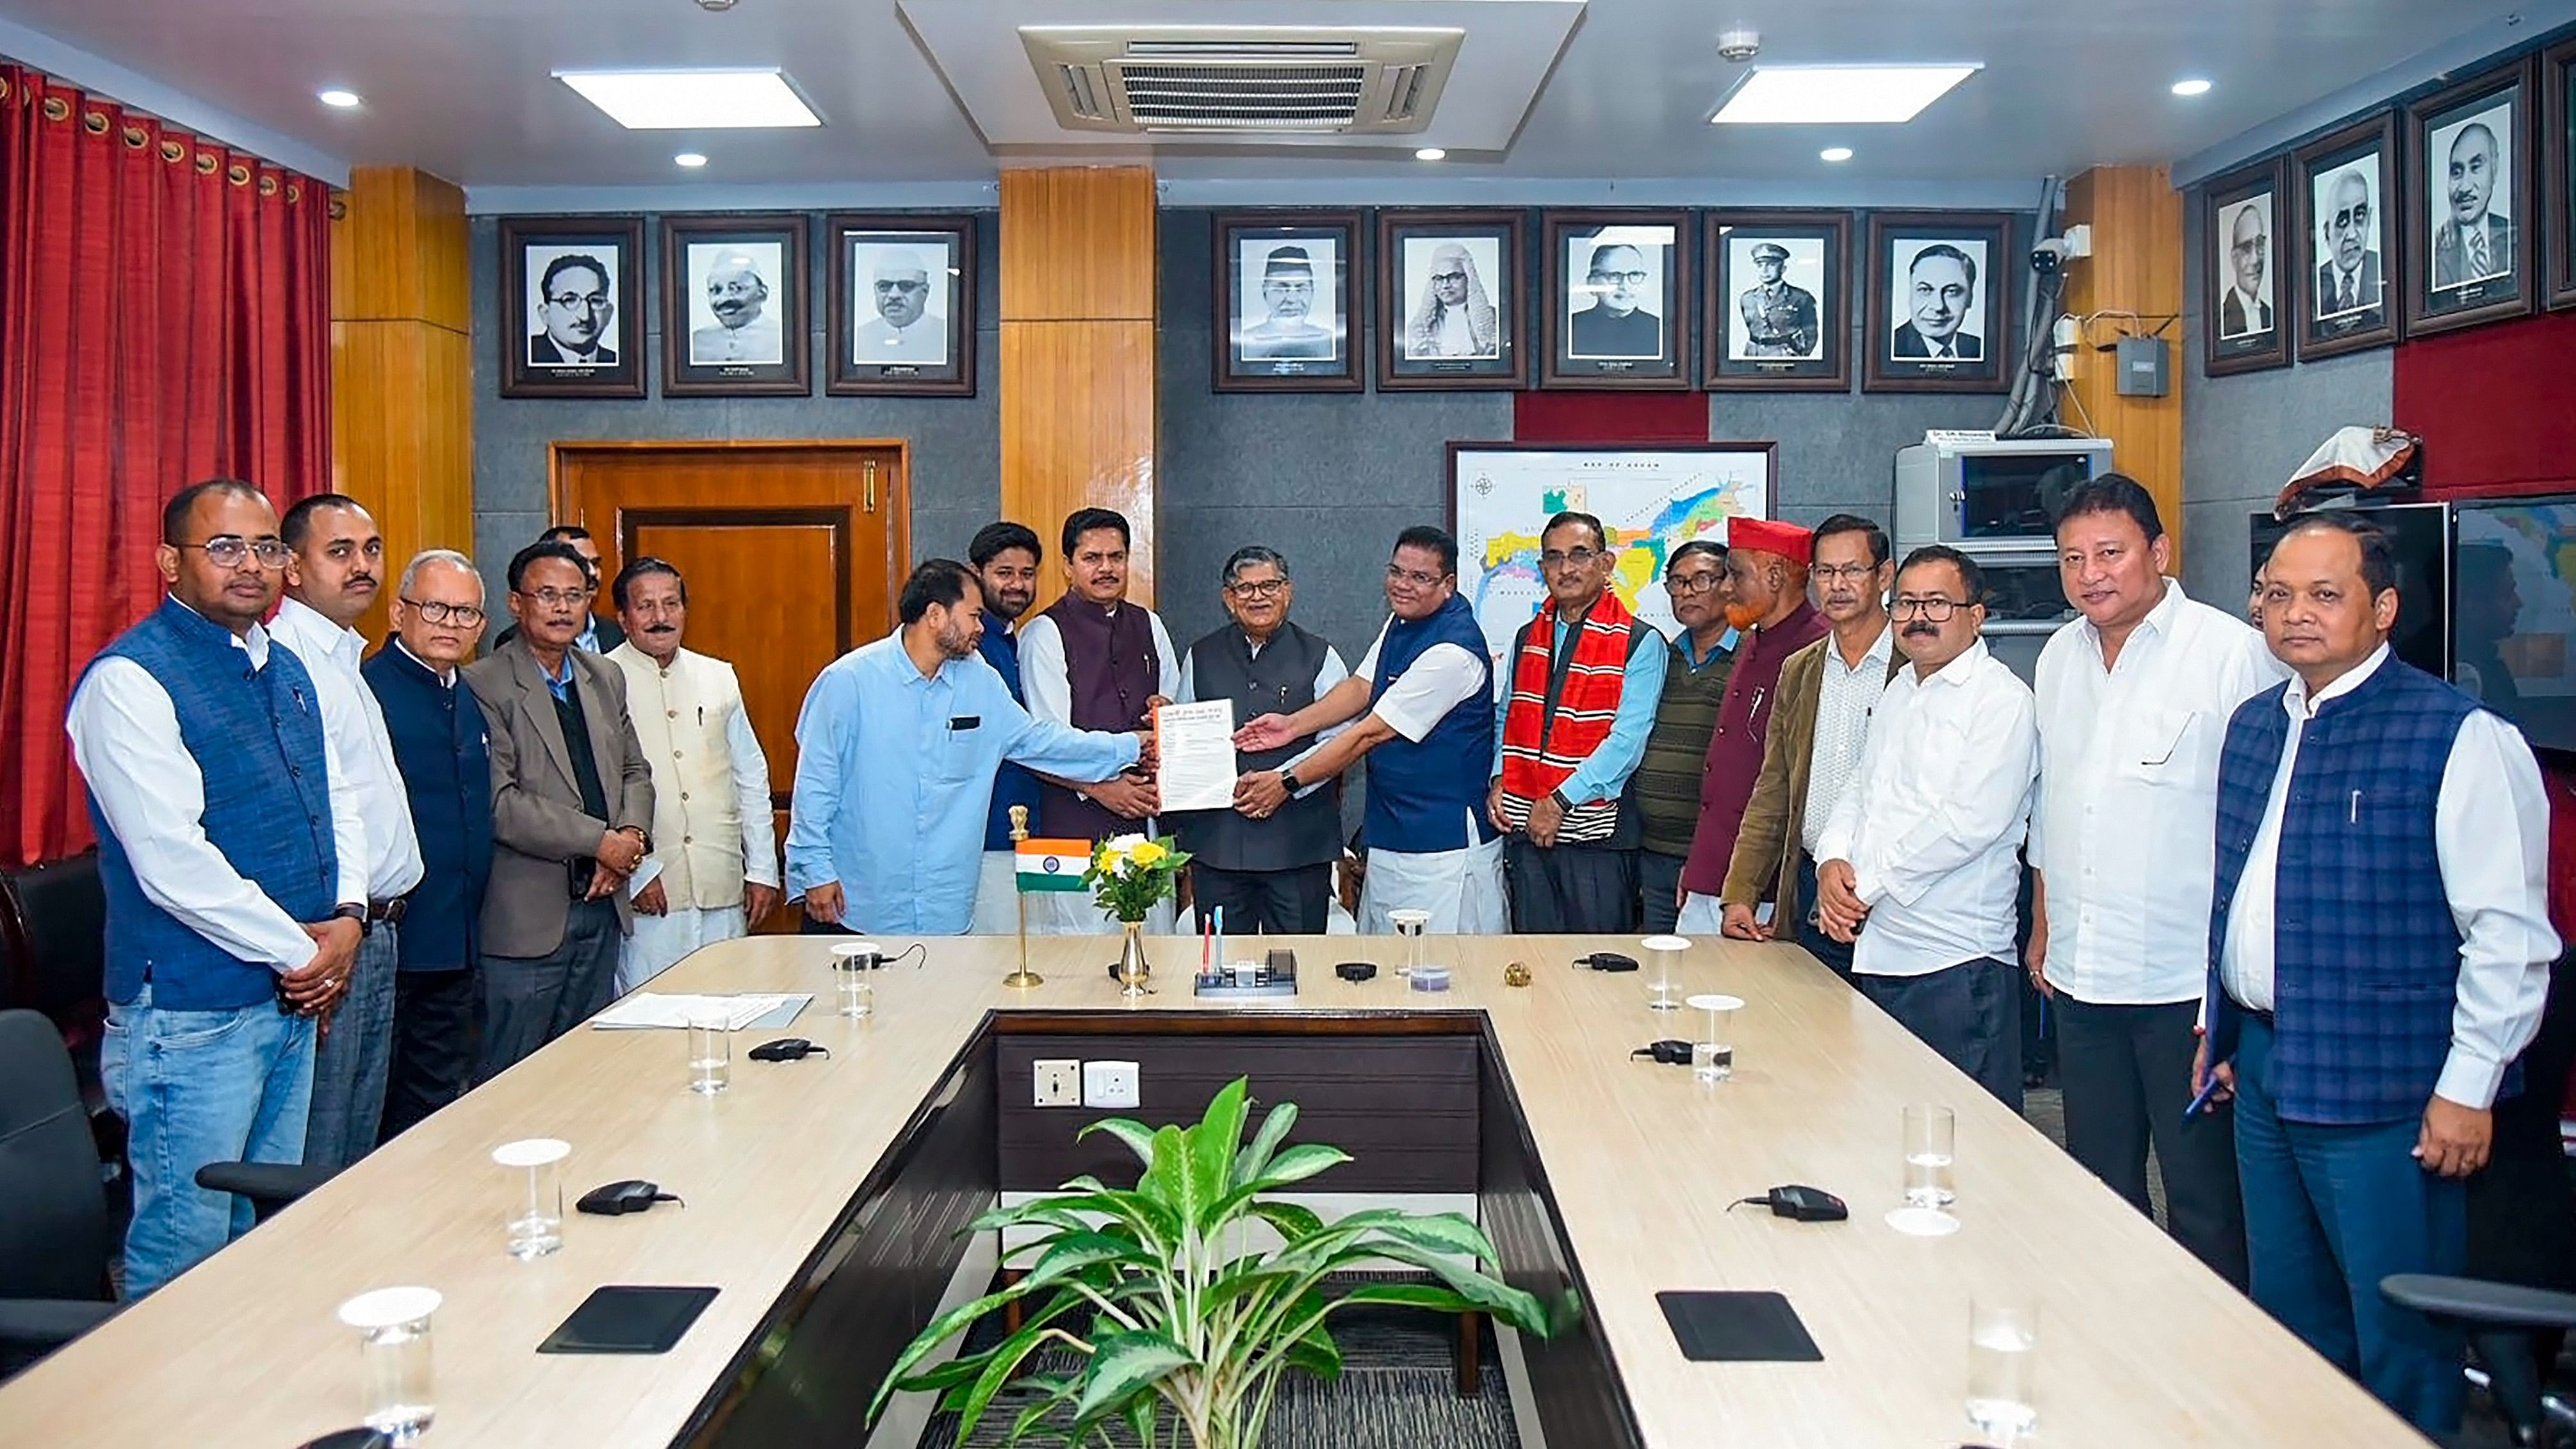 <div class="paragraphs"><p>United Opposition Forum President Bhupen Borah and General Secretary Lurinjyoti Gogoi along with TMC leader Ripun Bora, MLA Akhil Gogoi and other leaders of the forum submit to Assam Governor Gulab Chand Kataria a memorandum opposing implementation of CAA in Assam, in Guwahati.</p></div>